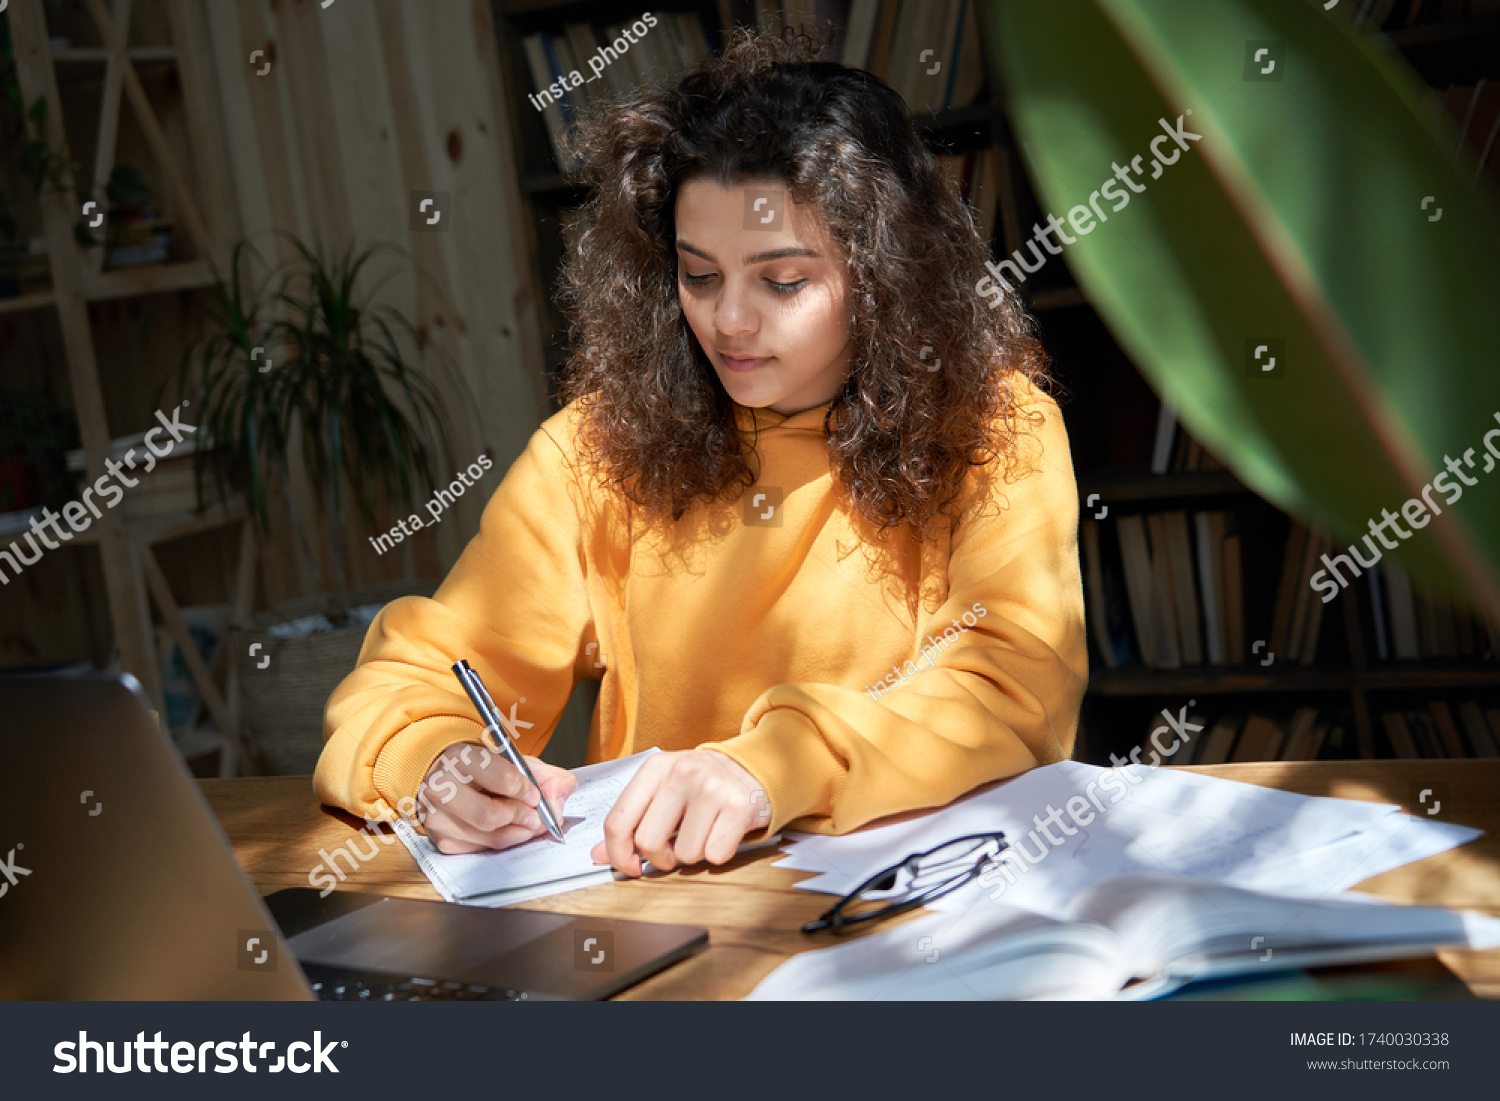 Hispanic teen girl college student study from home office making notes doing homework in sunny room. Latin smart teenage school pupil learning online on laptop sit at desk. Distance elearning concept. #1740030338